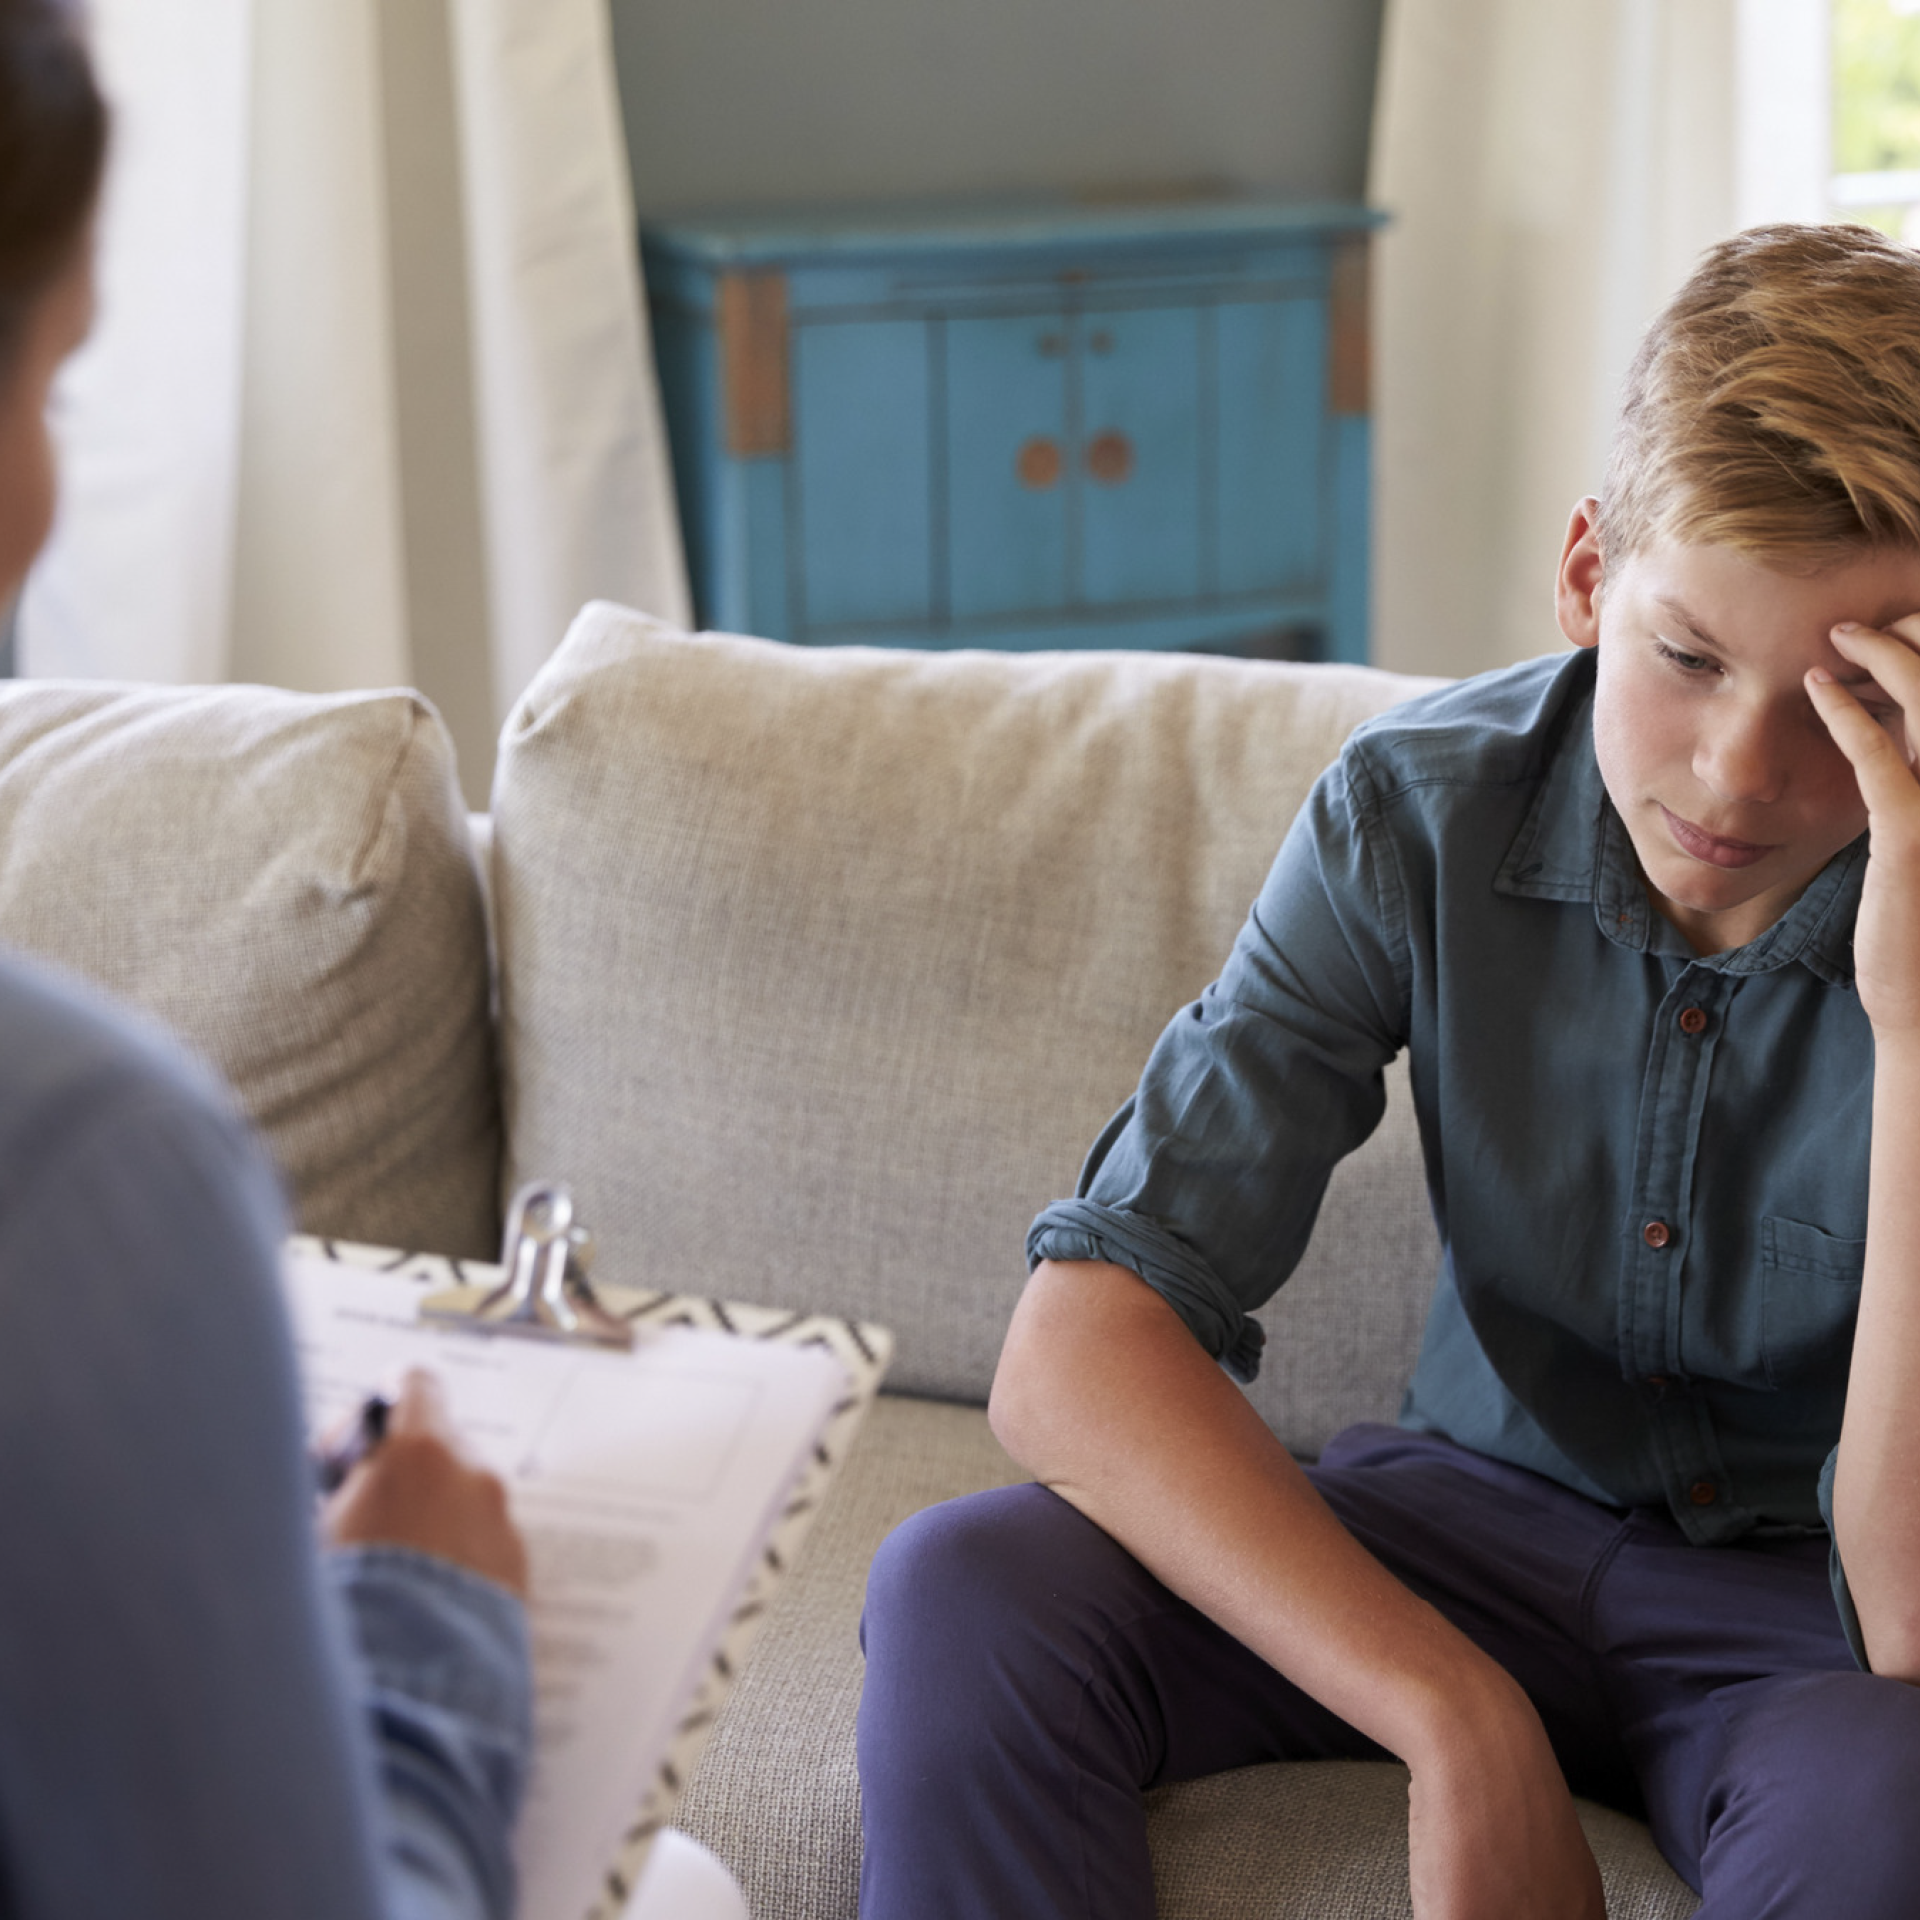 A boy sits on a couch, leaning his forehead on his hand, talking to a woman with a clipboard.